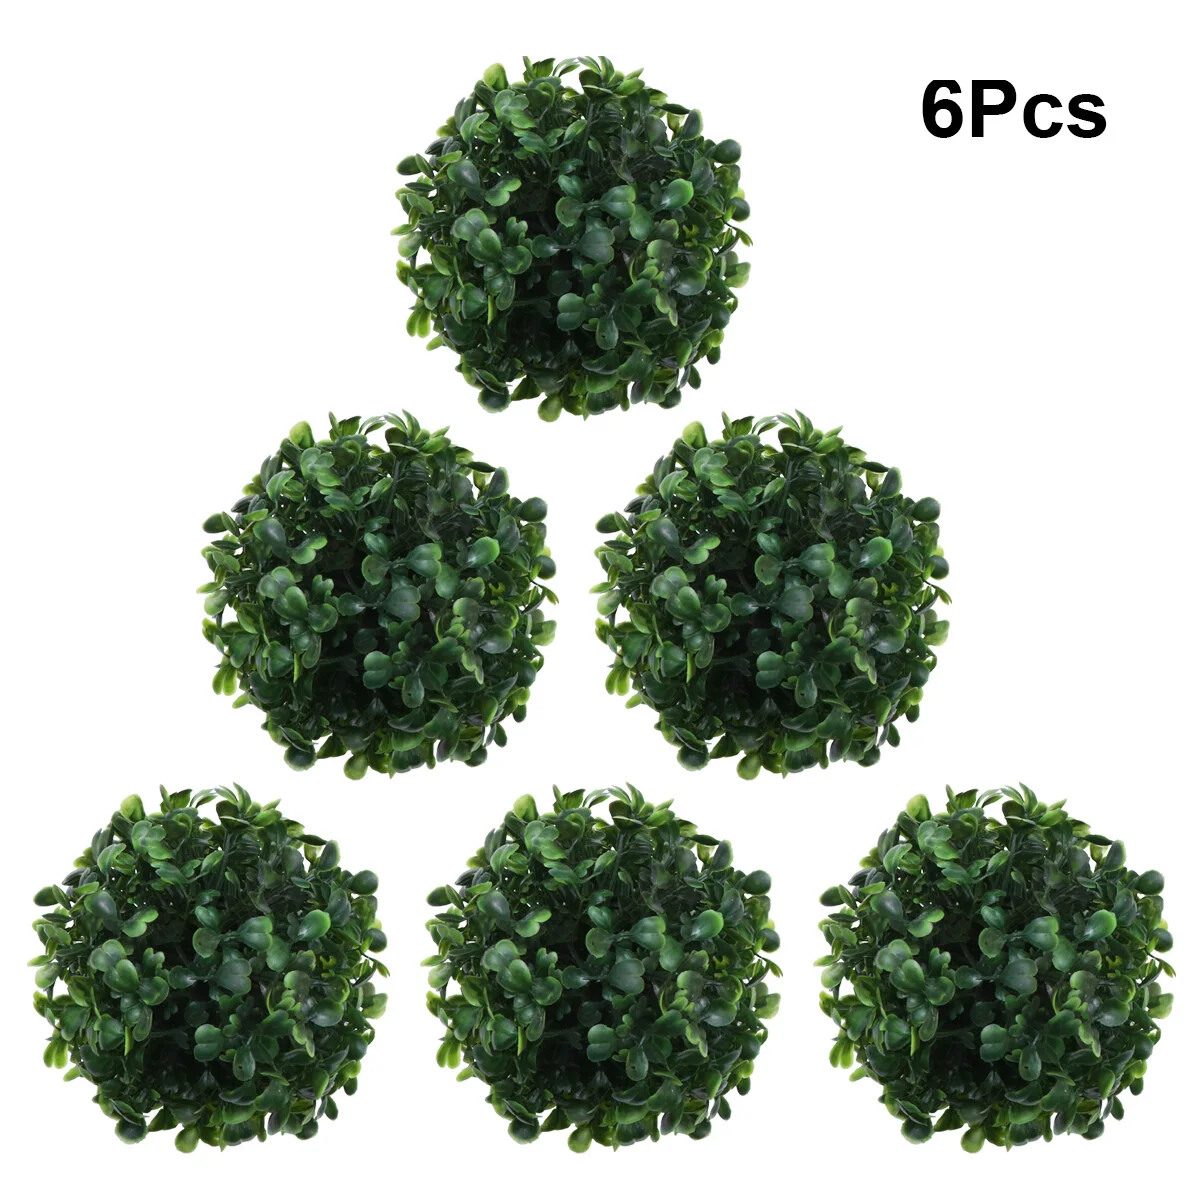 

6pcs Artificial Topiary 10cm Boxwood Flower Arrangement Ornament for Home Schools Factories Private Clubs Green Landscaping